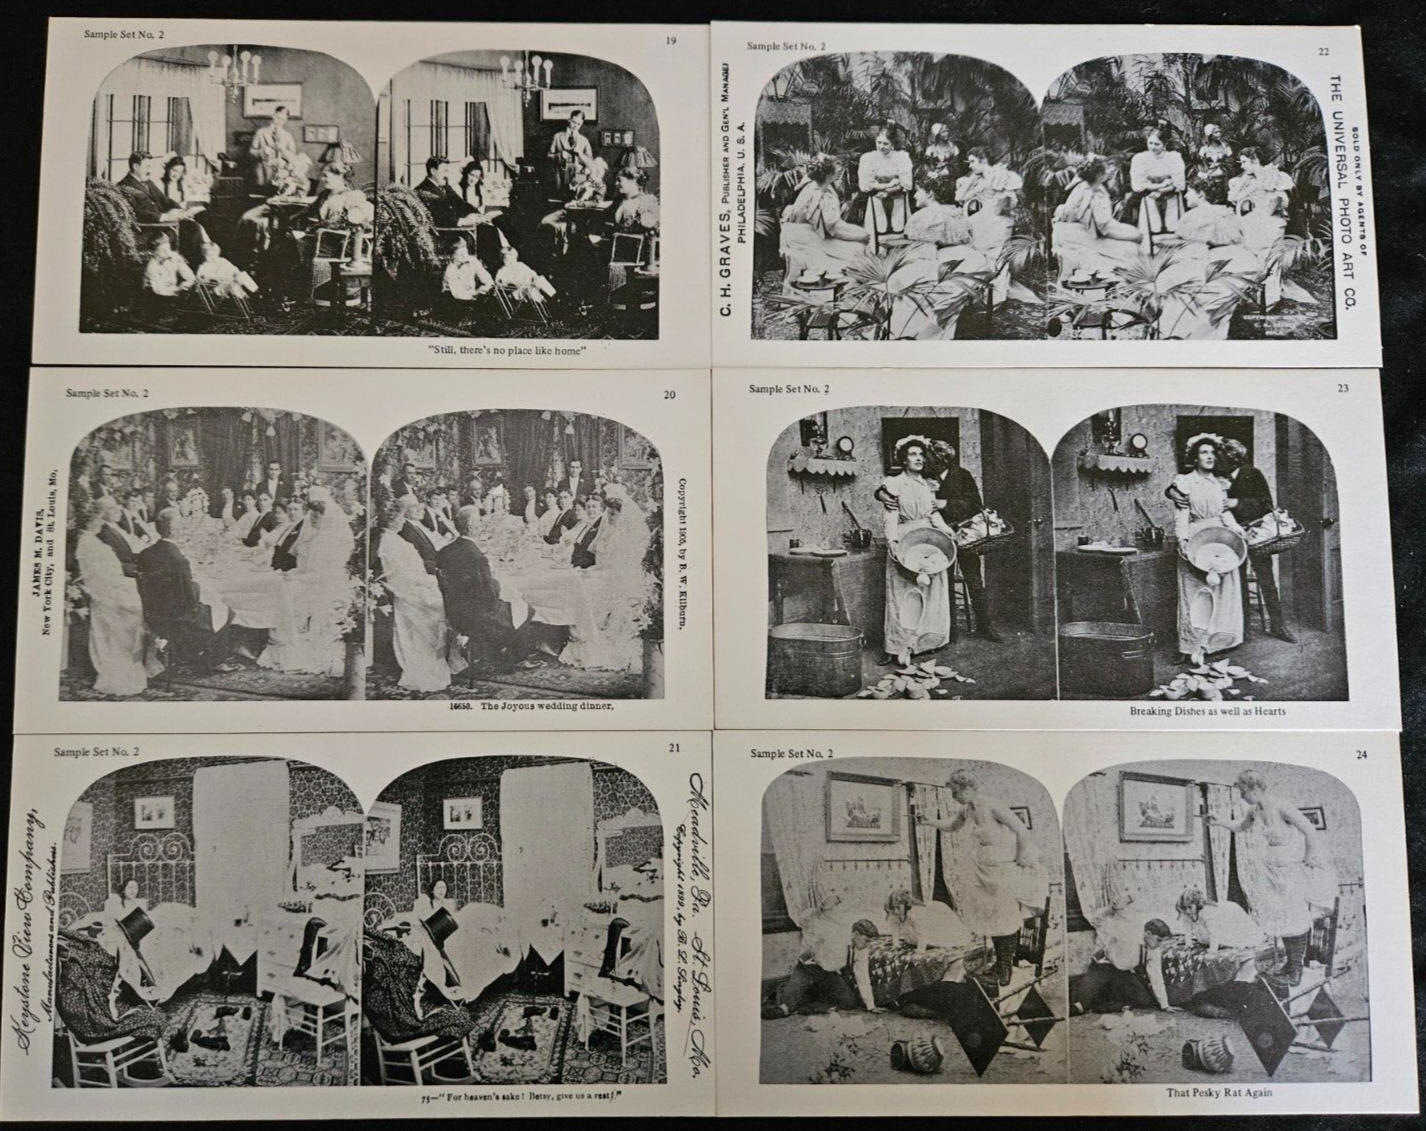 6 Stereoscope Cards, Stereo Classic Studios, Sample Set No 2 (Lot 4 of 5). 1981.